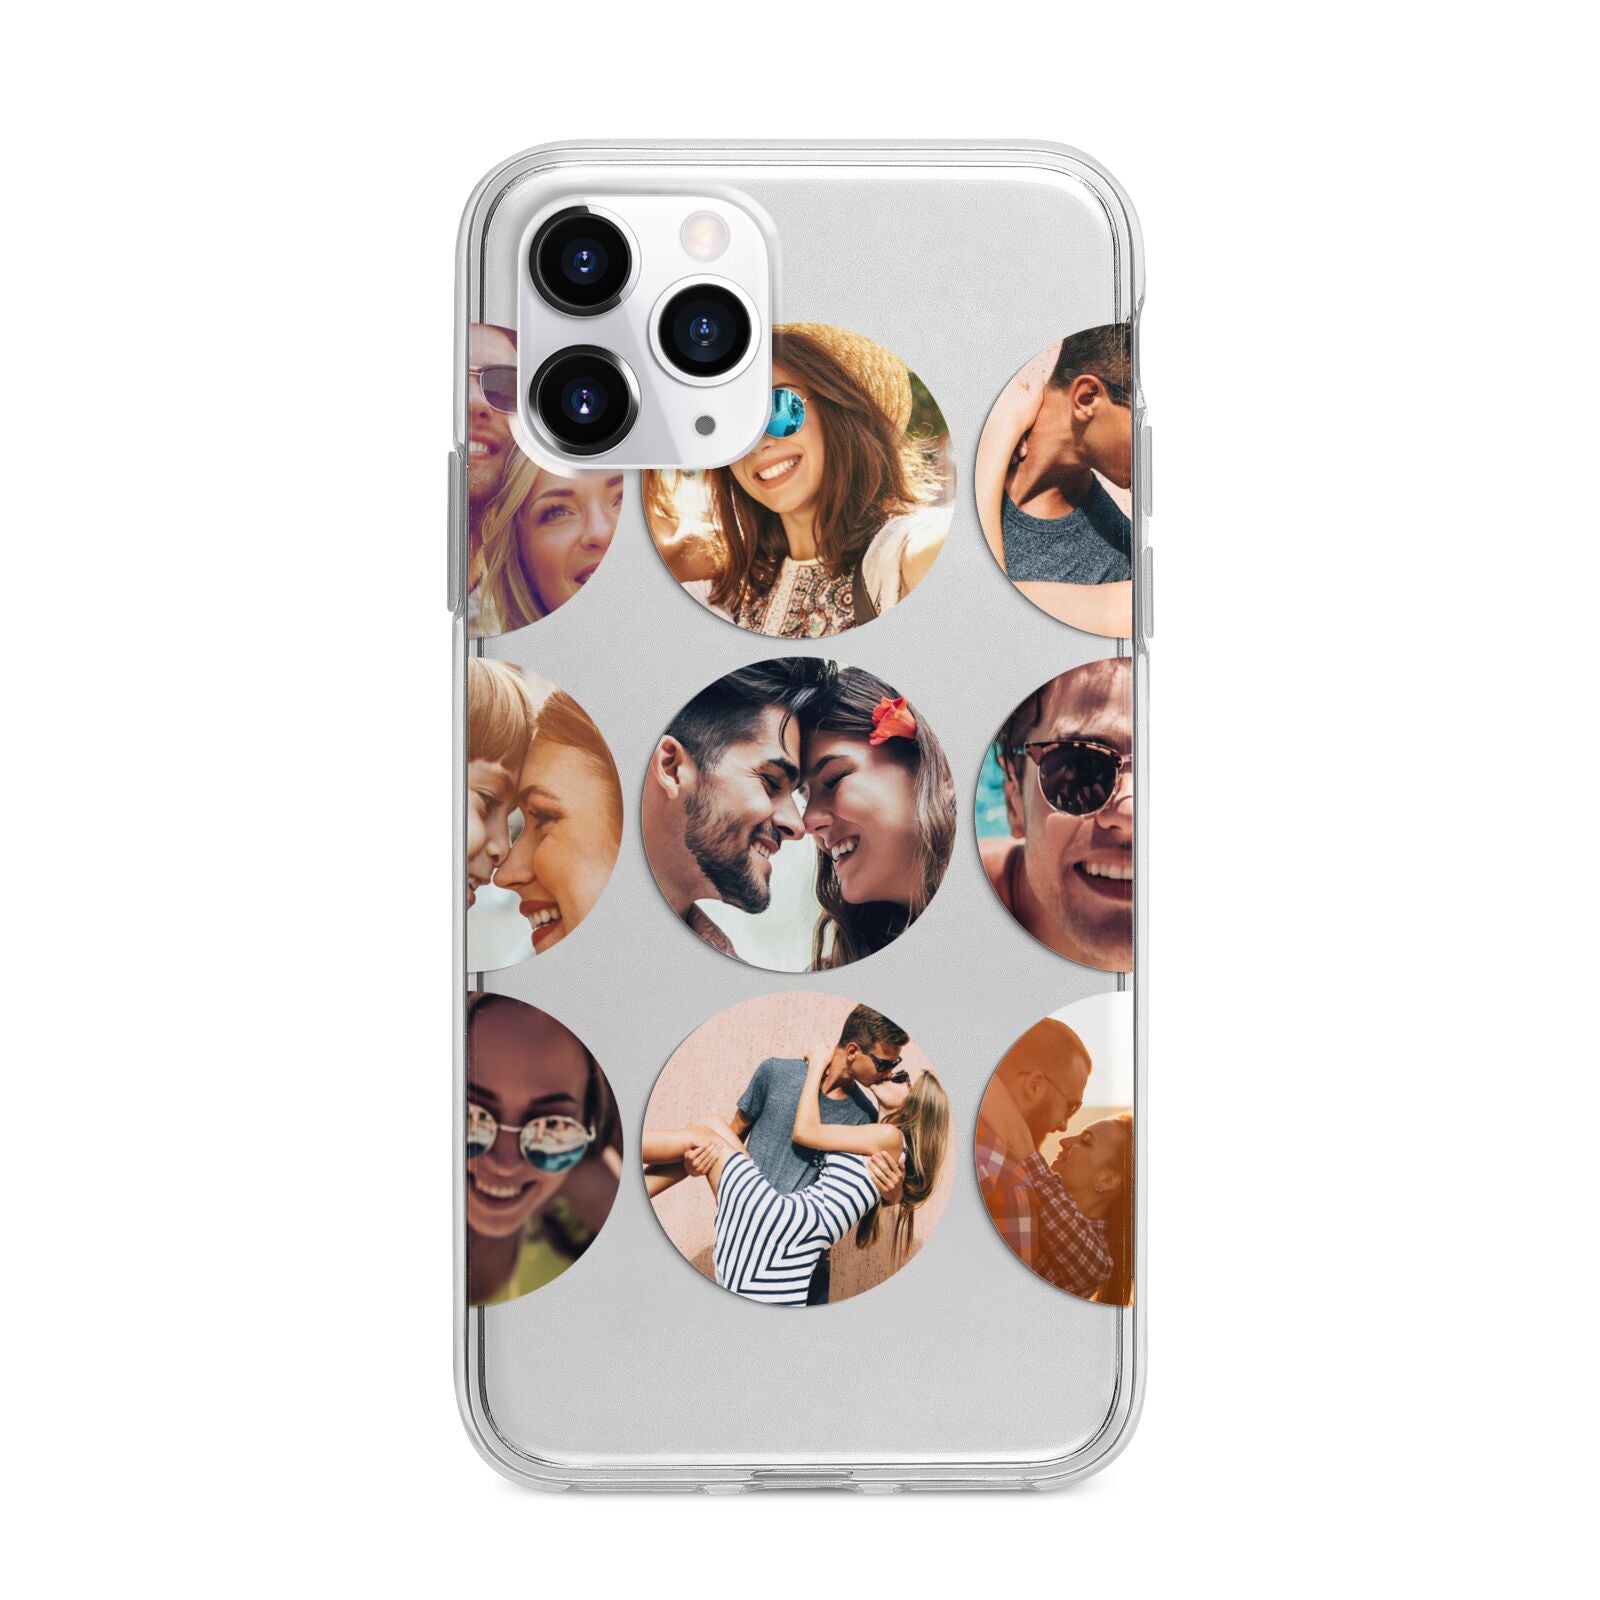 Circular Photo Montage Upload Apple iPhone 11 Pro Max in Silver with Bumper Case